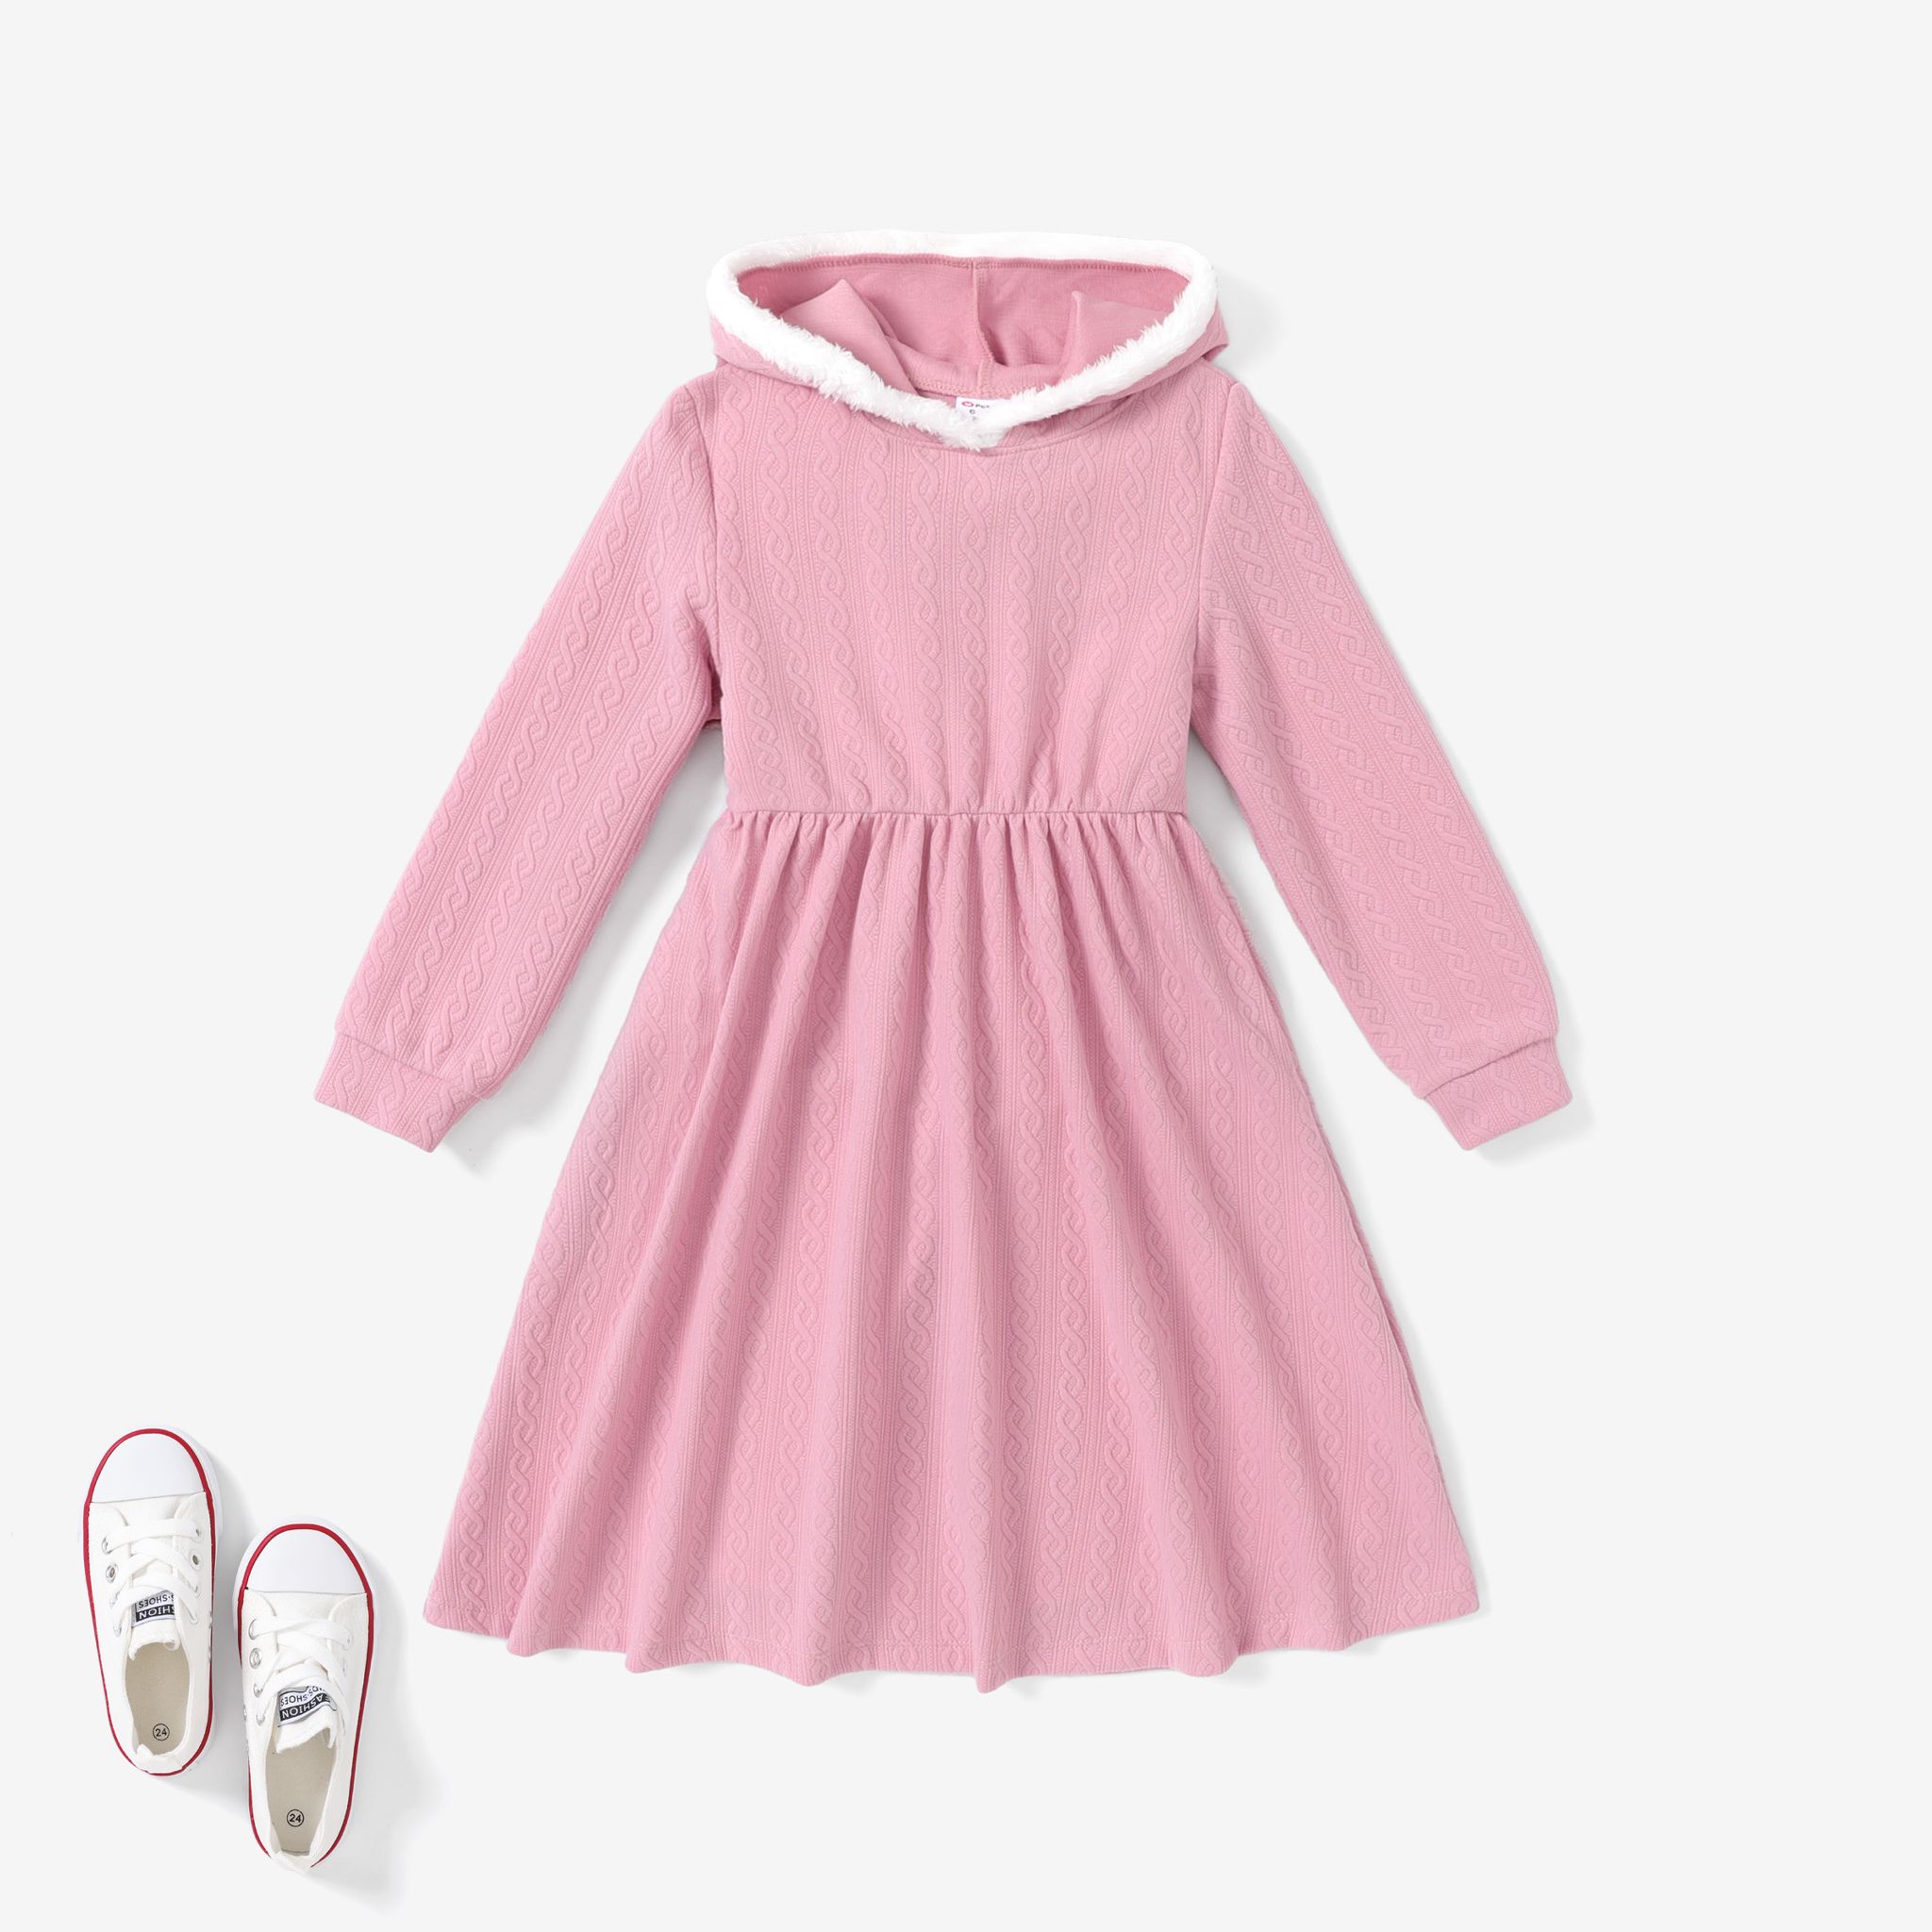 Kid Girl's Basic Solid Color Textured Material Hooded Dress